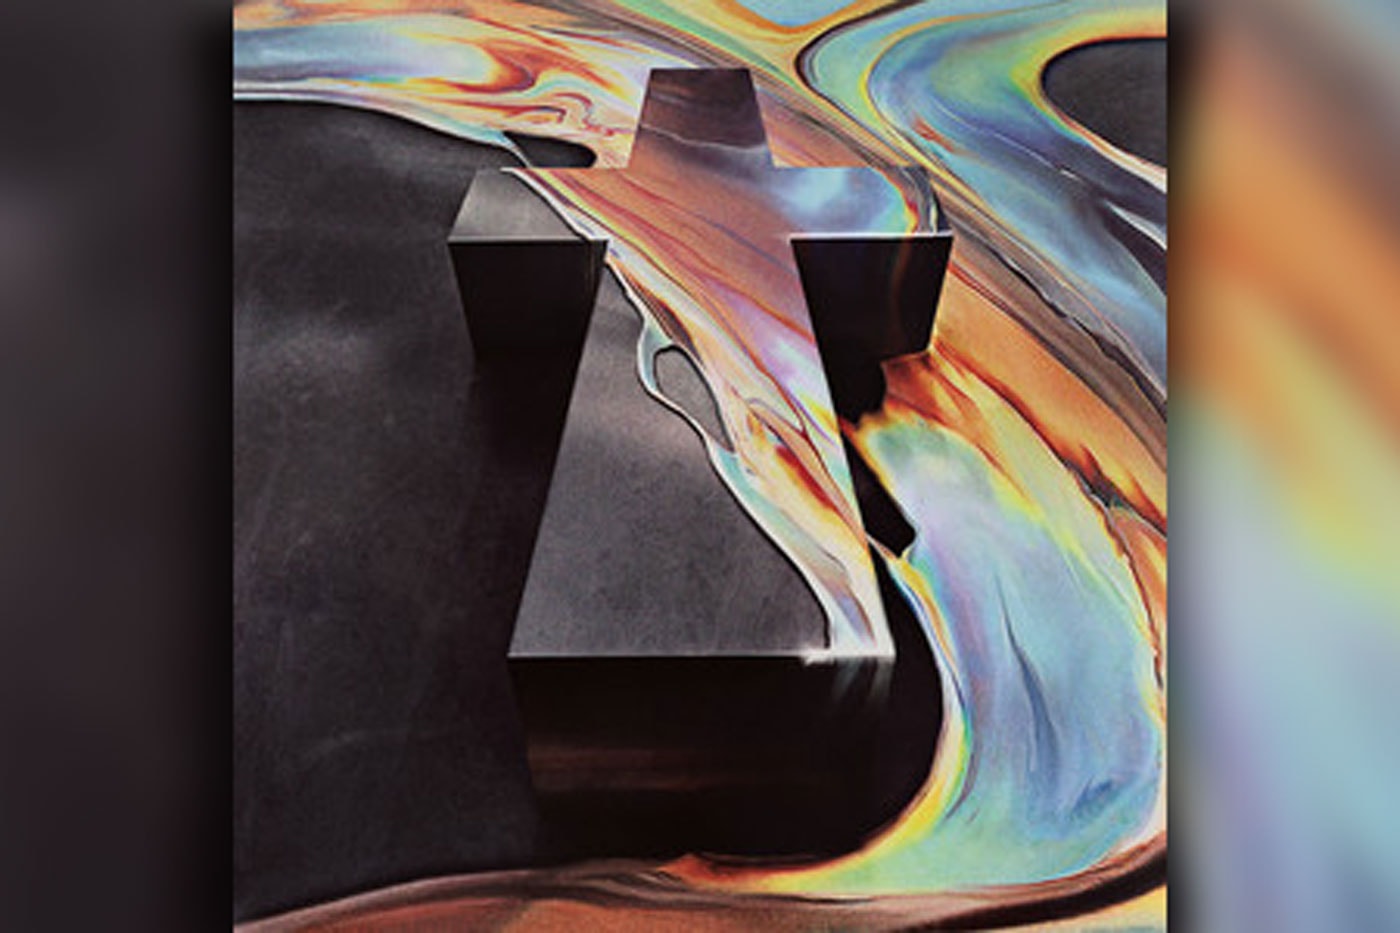 Justice Announce New Album 'Woman' and Drop New Single "Randy" ed banger records 